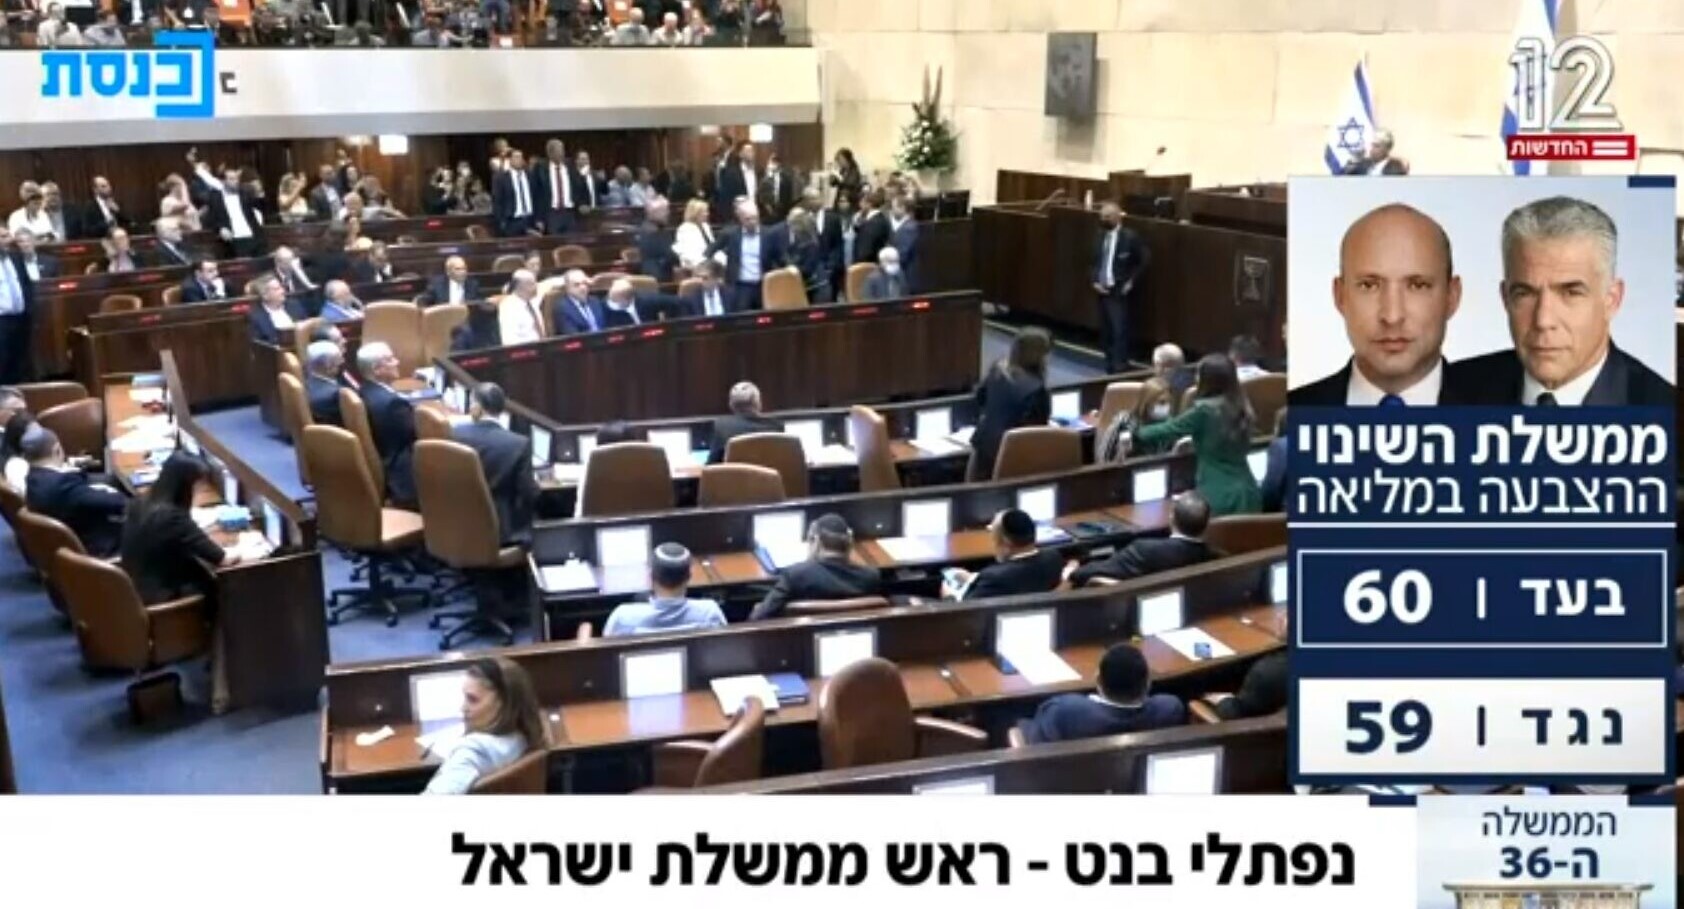 The results for the vote for the new Bennett-Lapid "change" government in the Knesset 60 in favor, 59 against, making Naftali Bennett Israel's Prime Minister," Sunday night, June 13, 2021